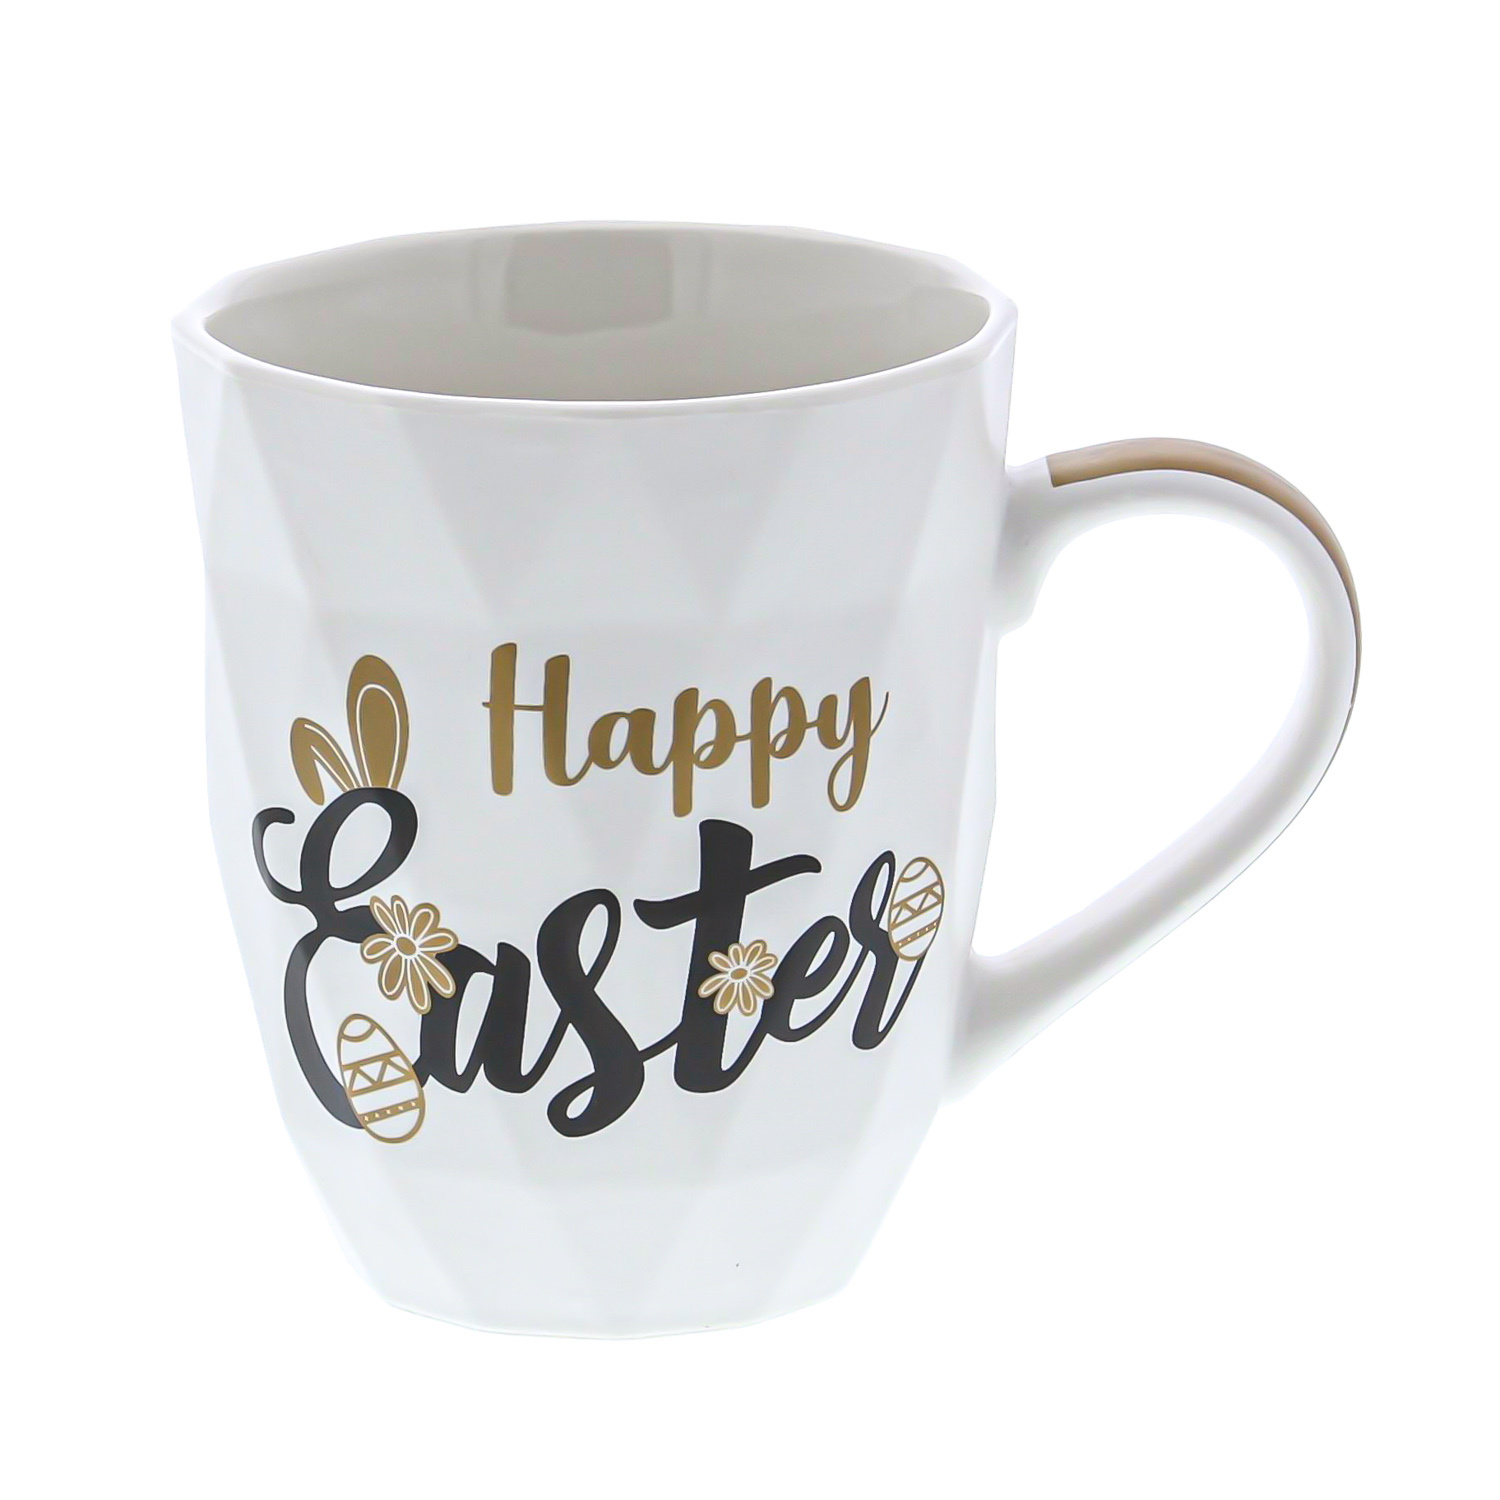 "Happy Easter" mug yellow/ black -120*86*103 mm - 12 pieces